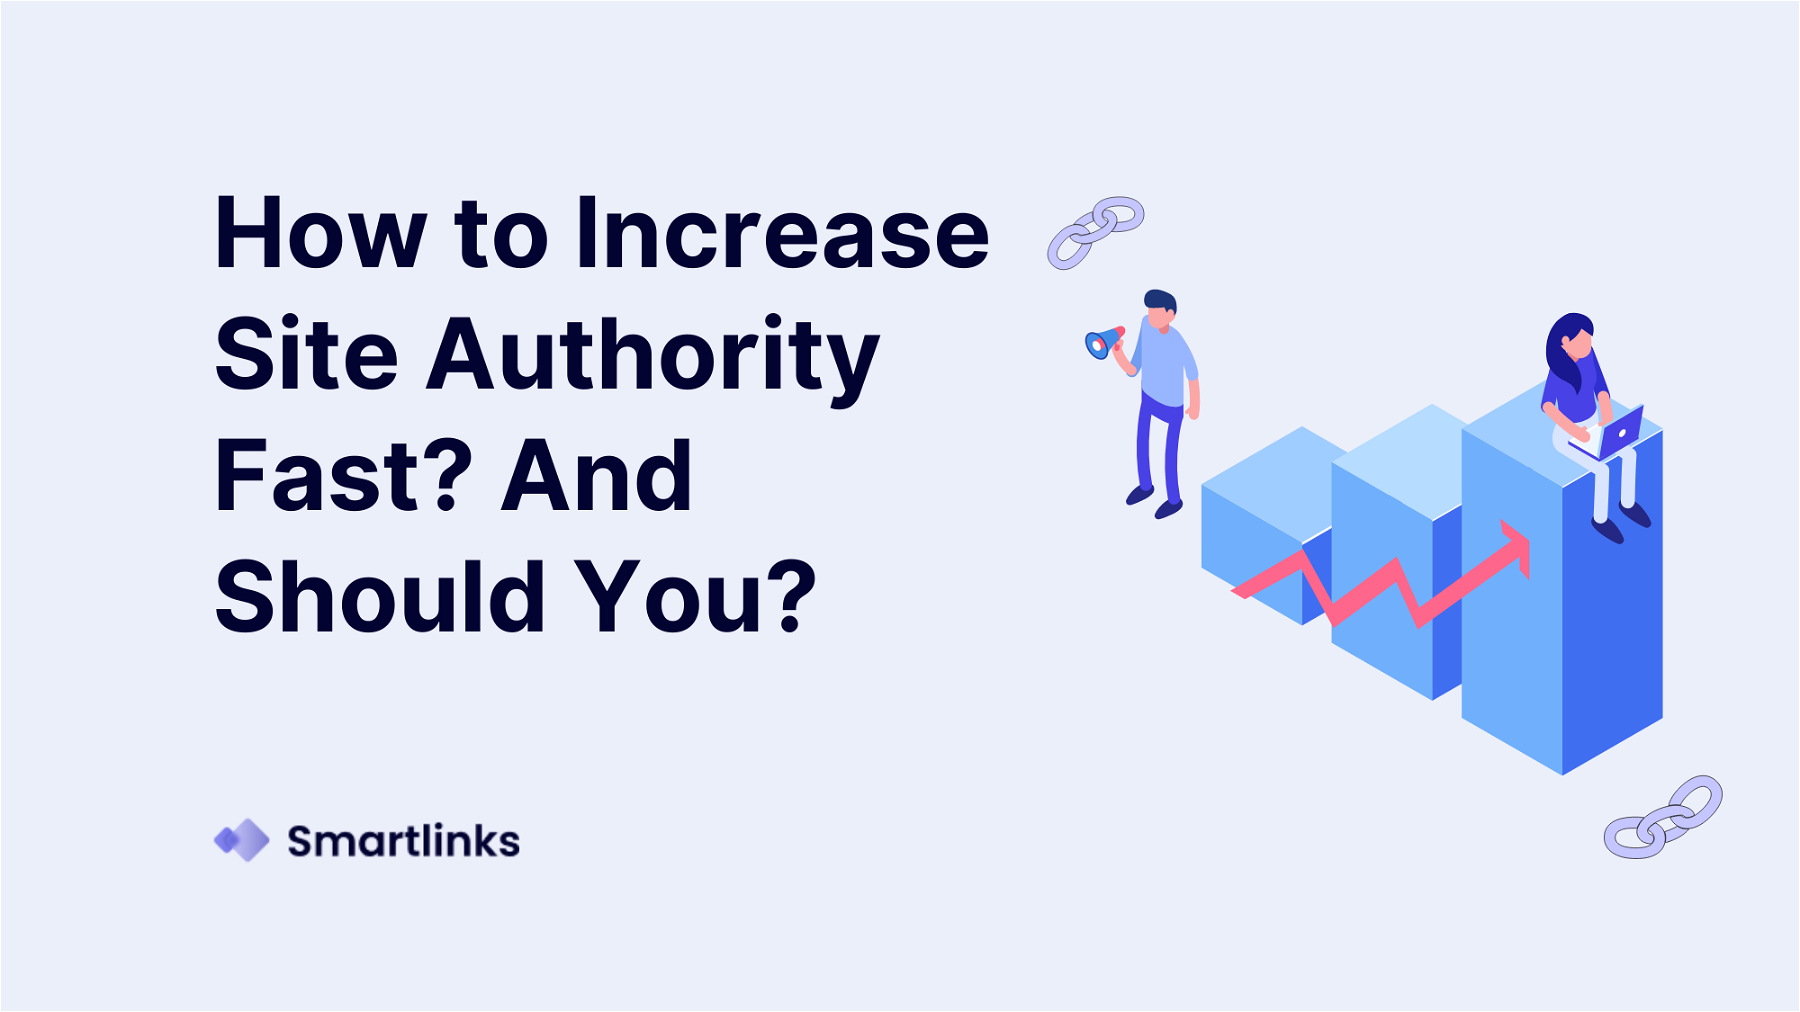 How to Increase Site Authority Fast? And Should you?